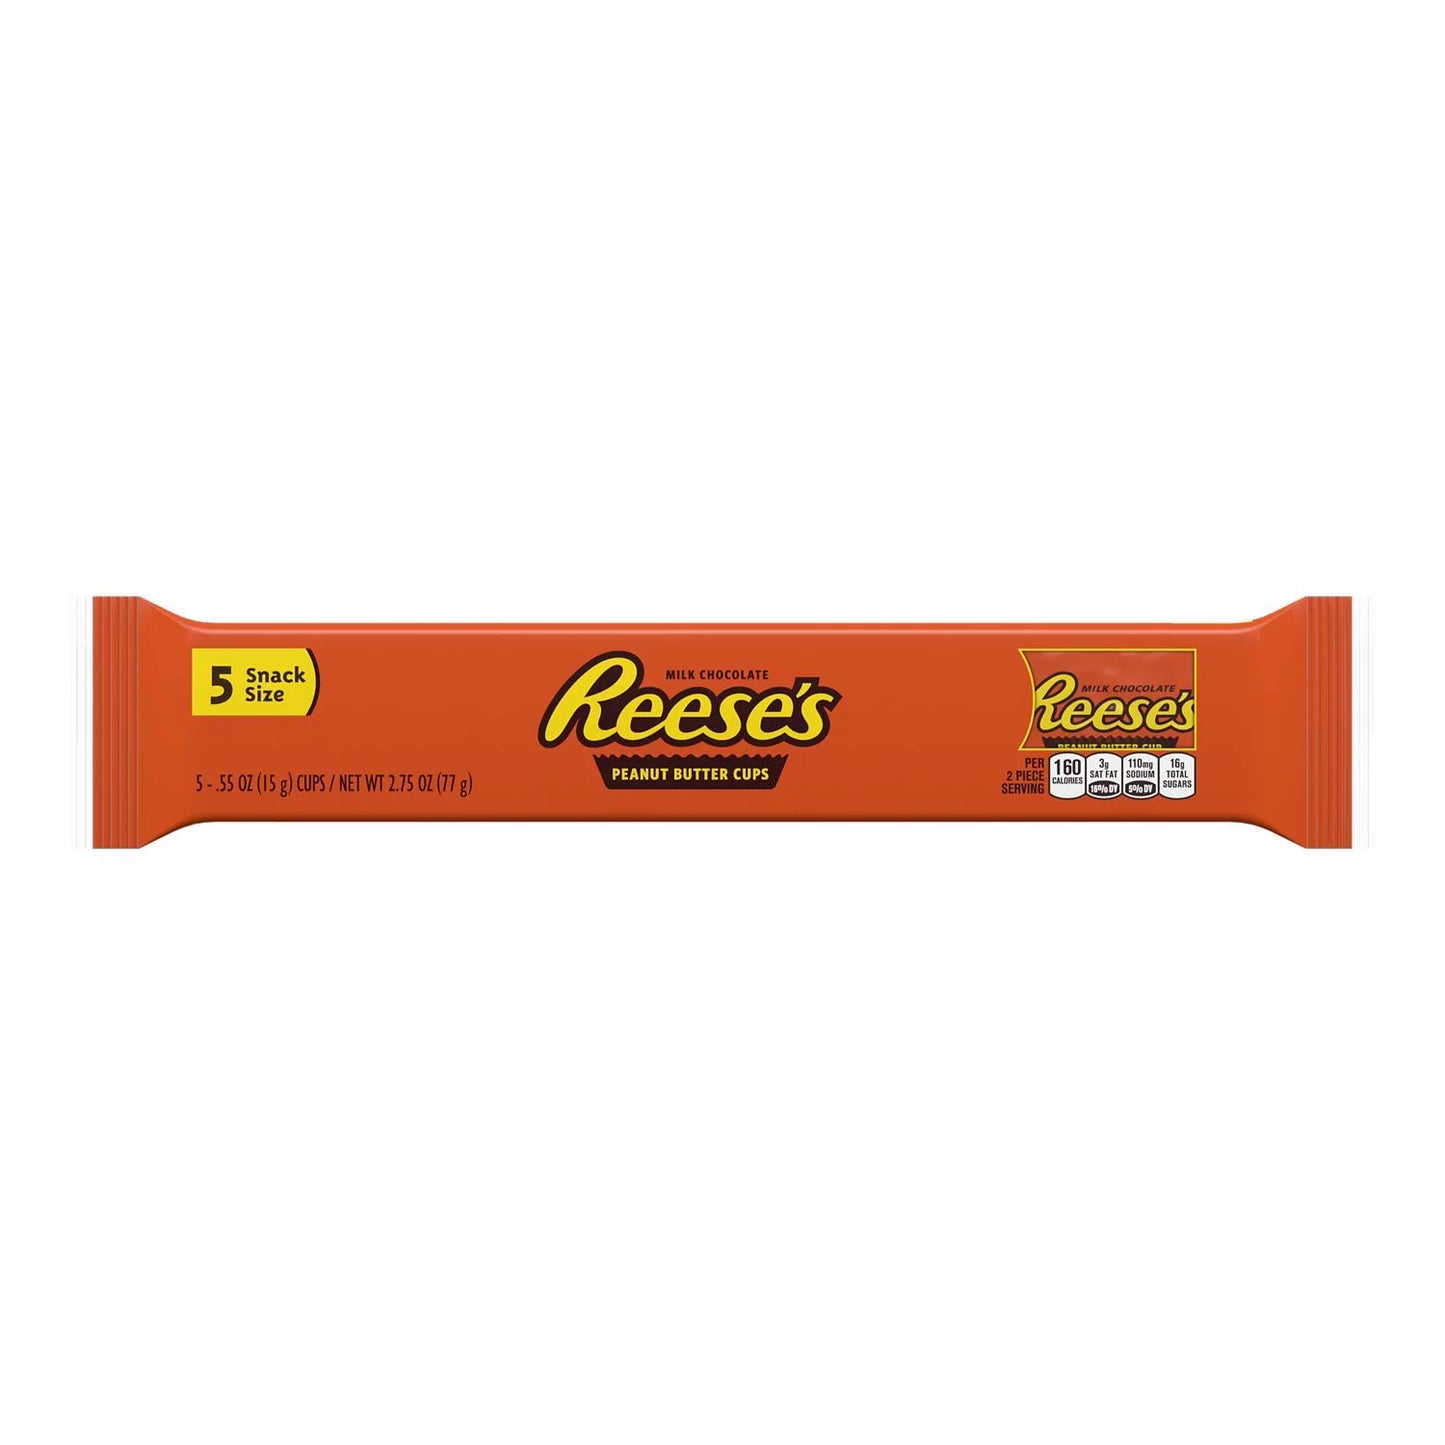 Reese's Snack Size x5 Cups